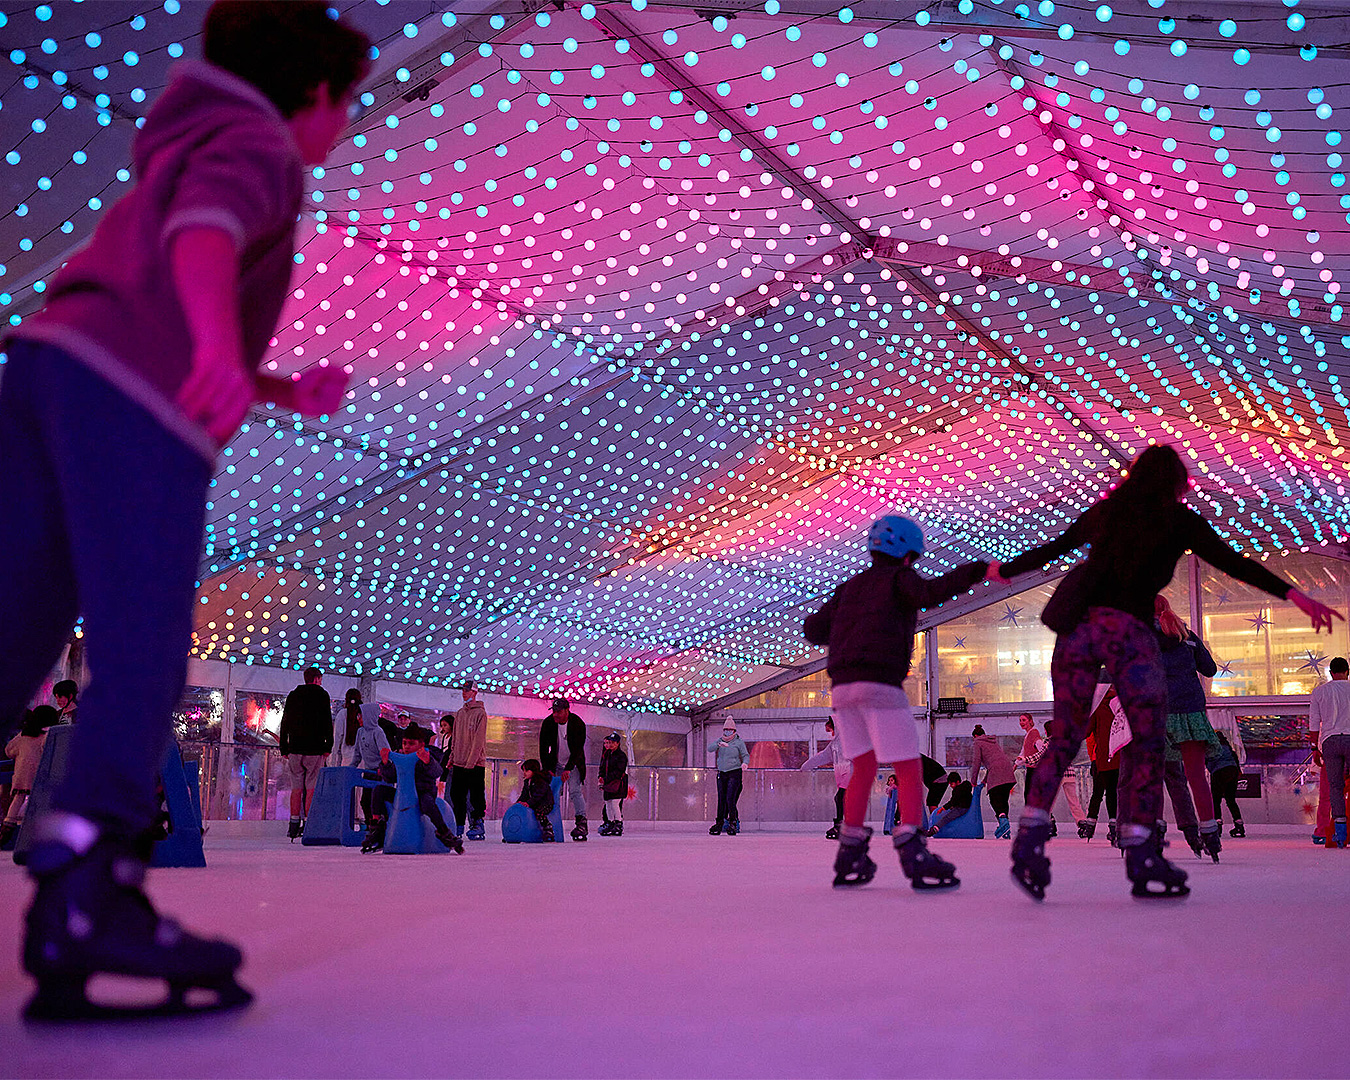 People have fun on the ice at Aotea Square Ice Rink